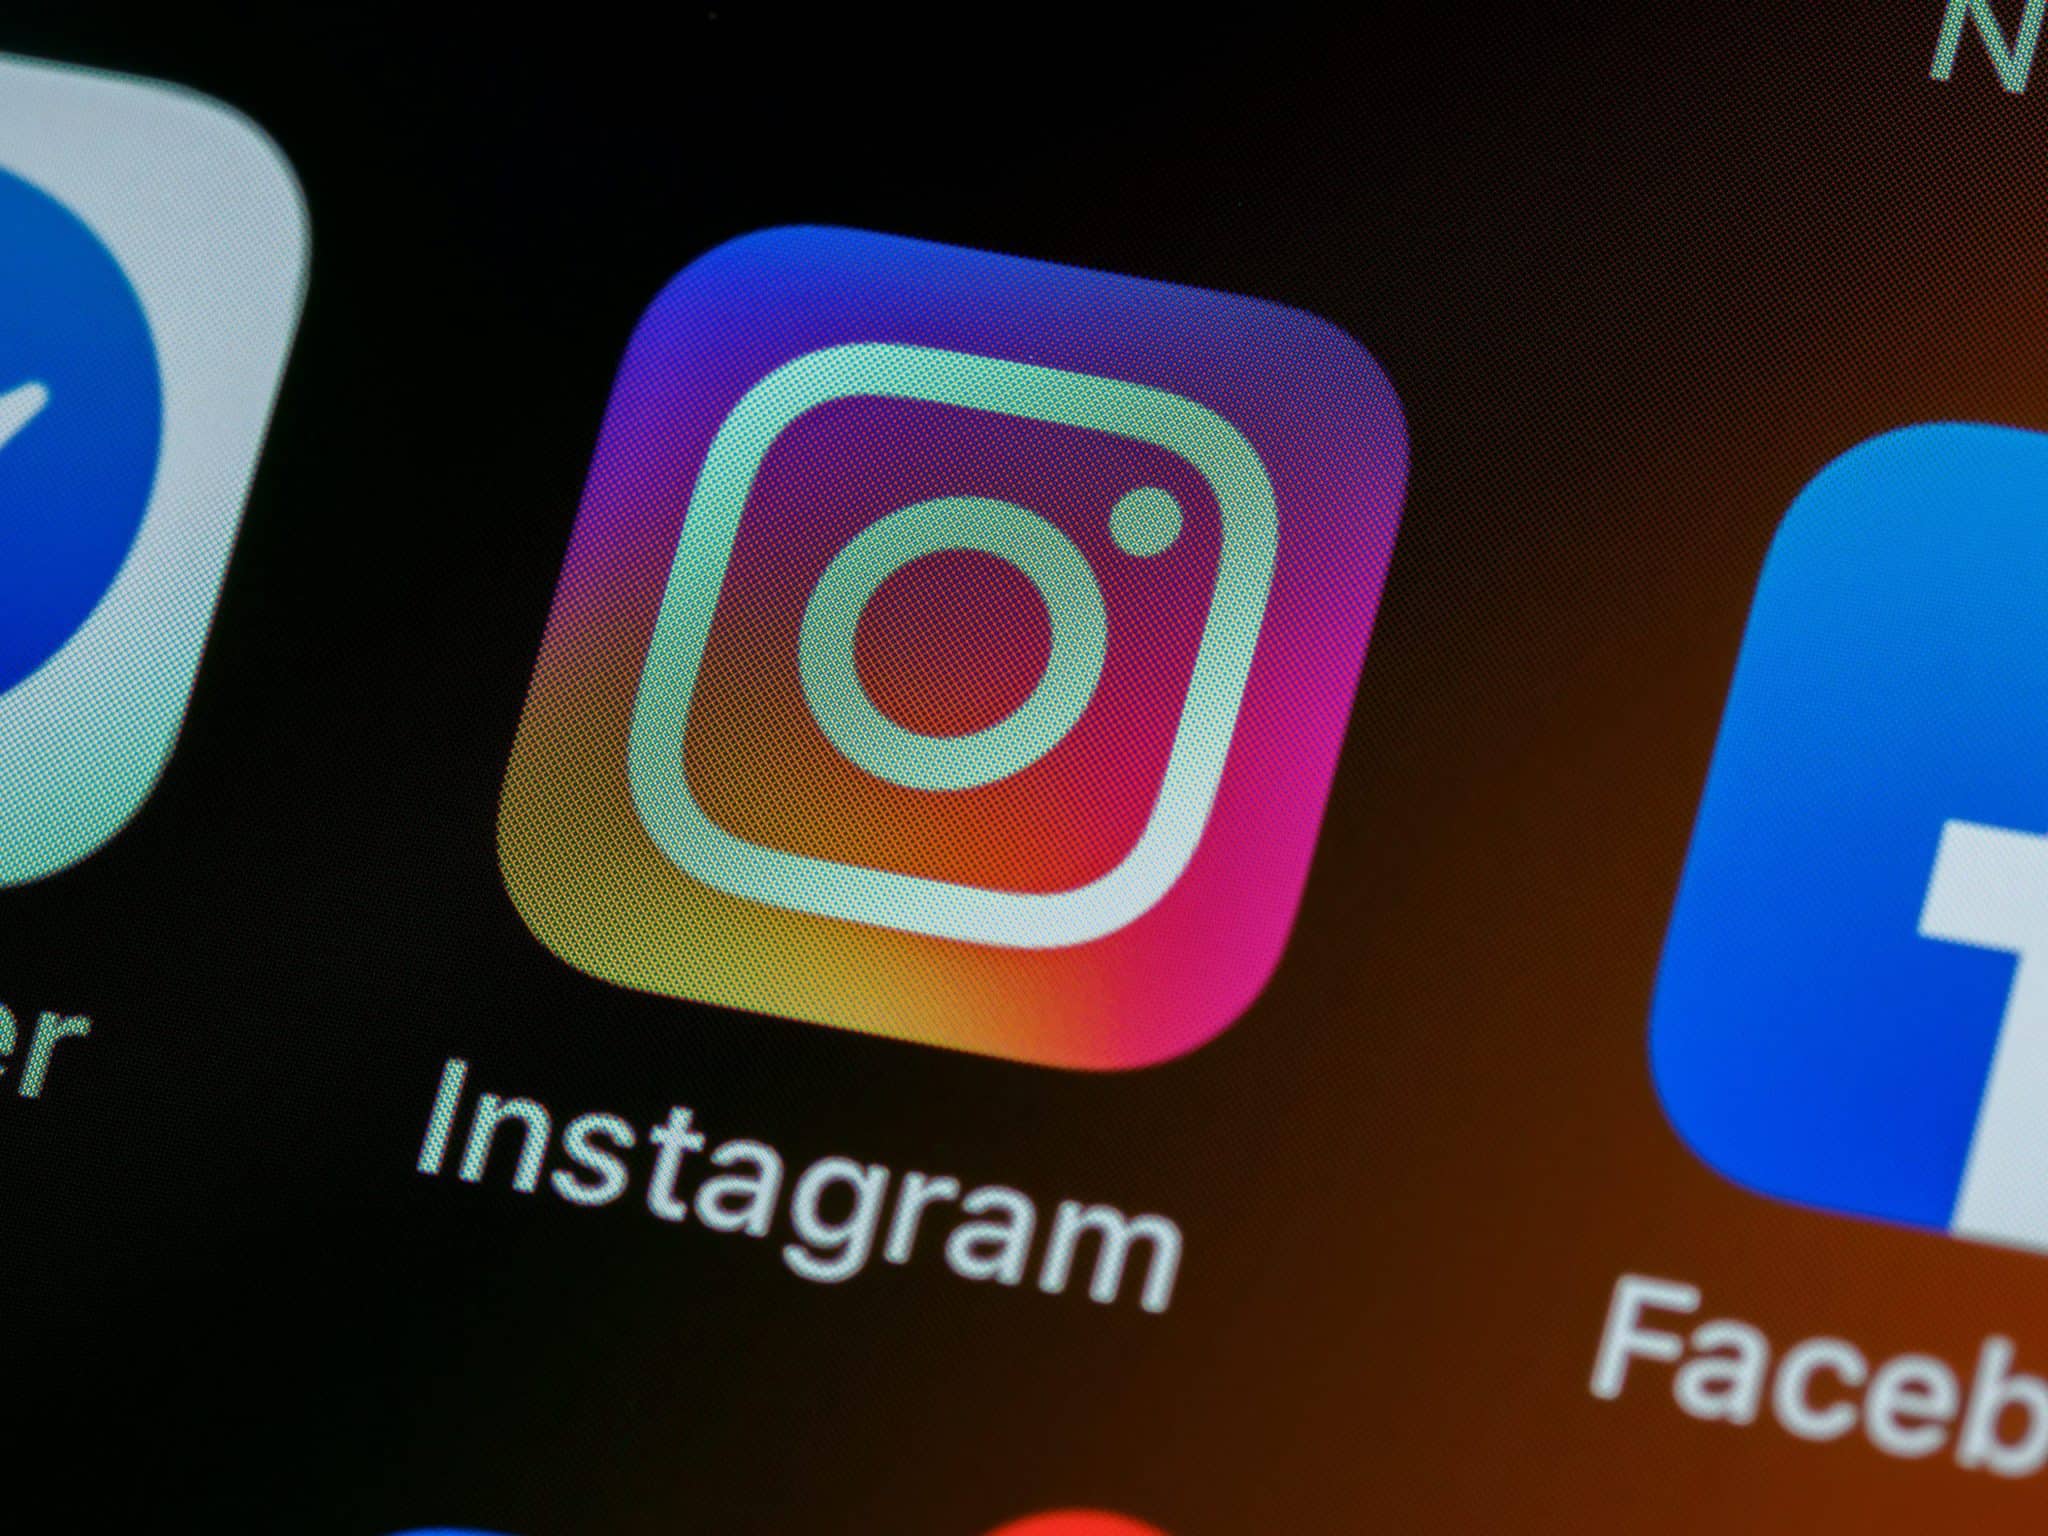 stock-photo-of-Instagram-icon-on-mobile-screen